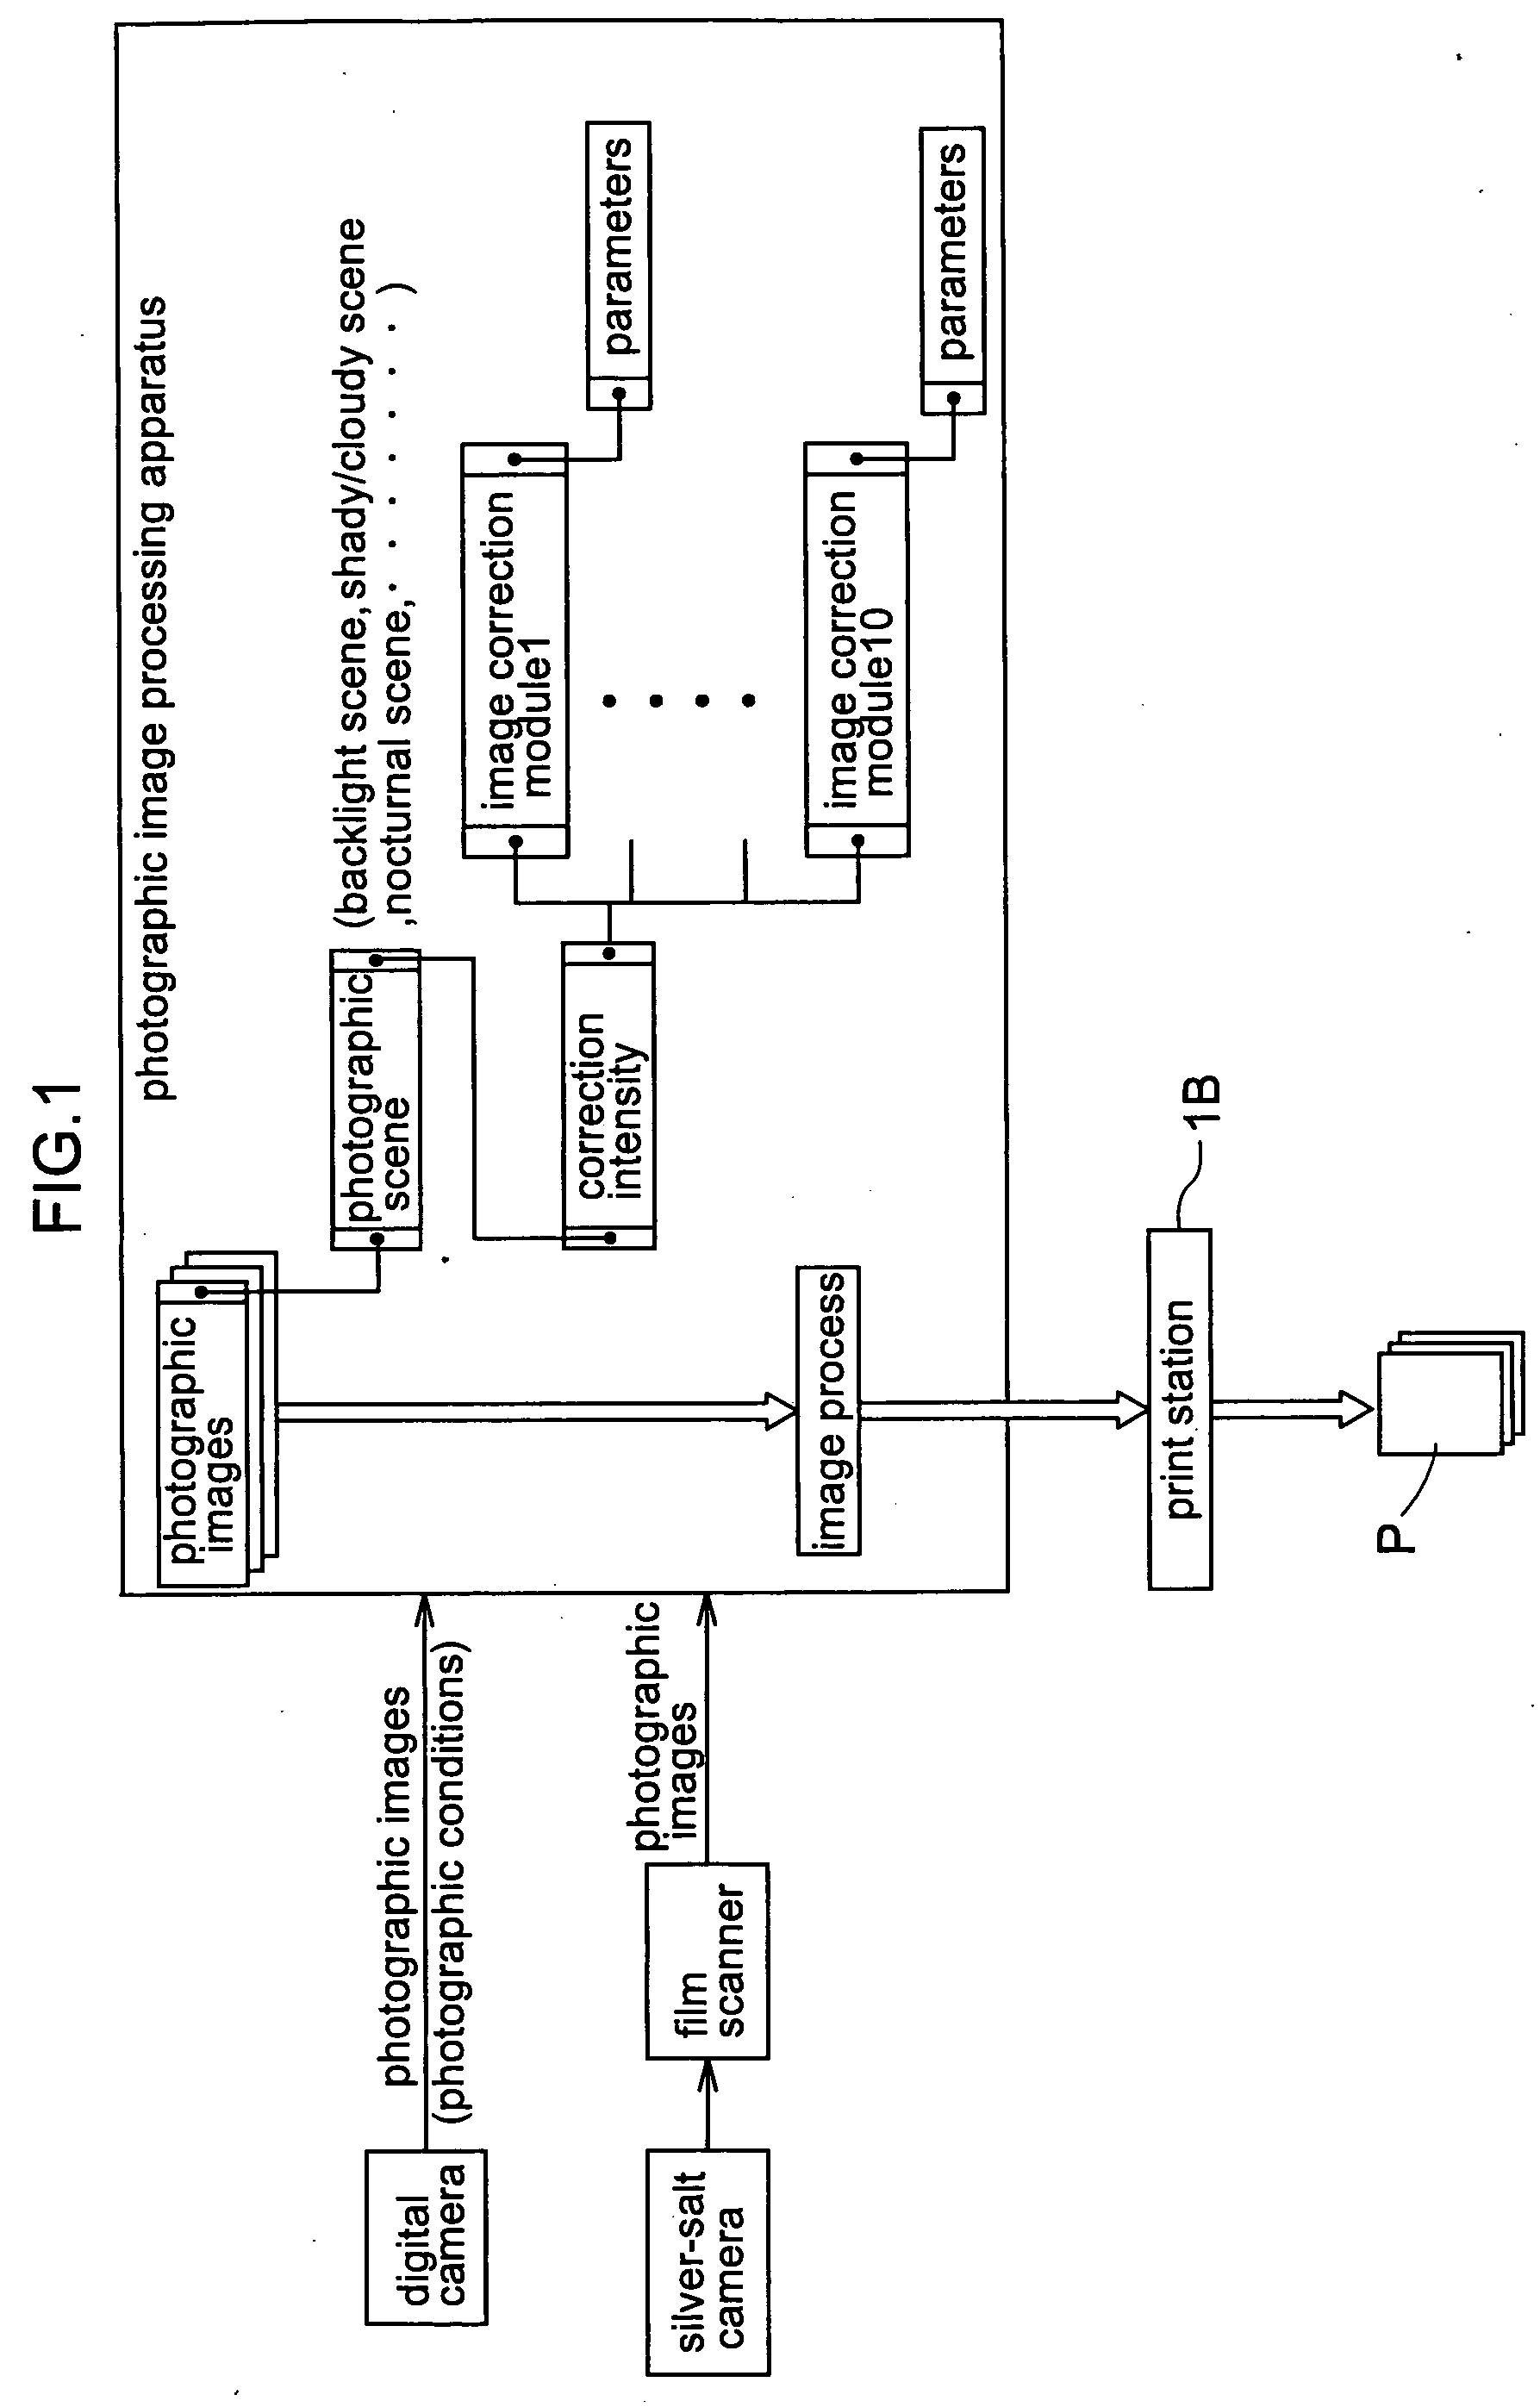 Apparatus and method for processing photographic image